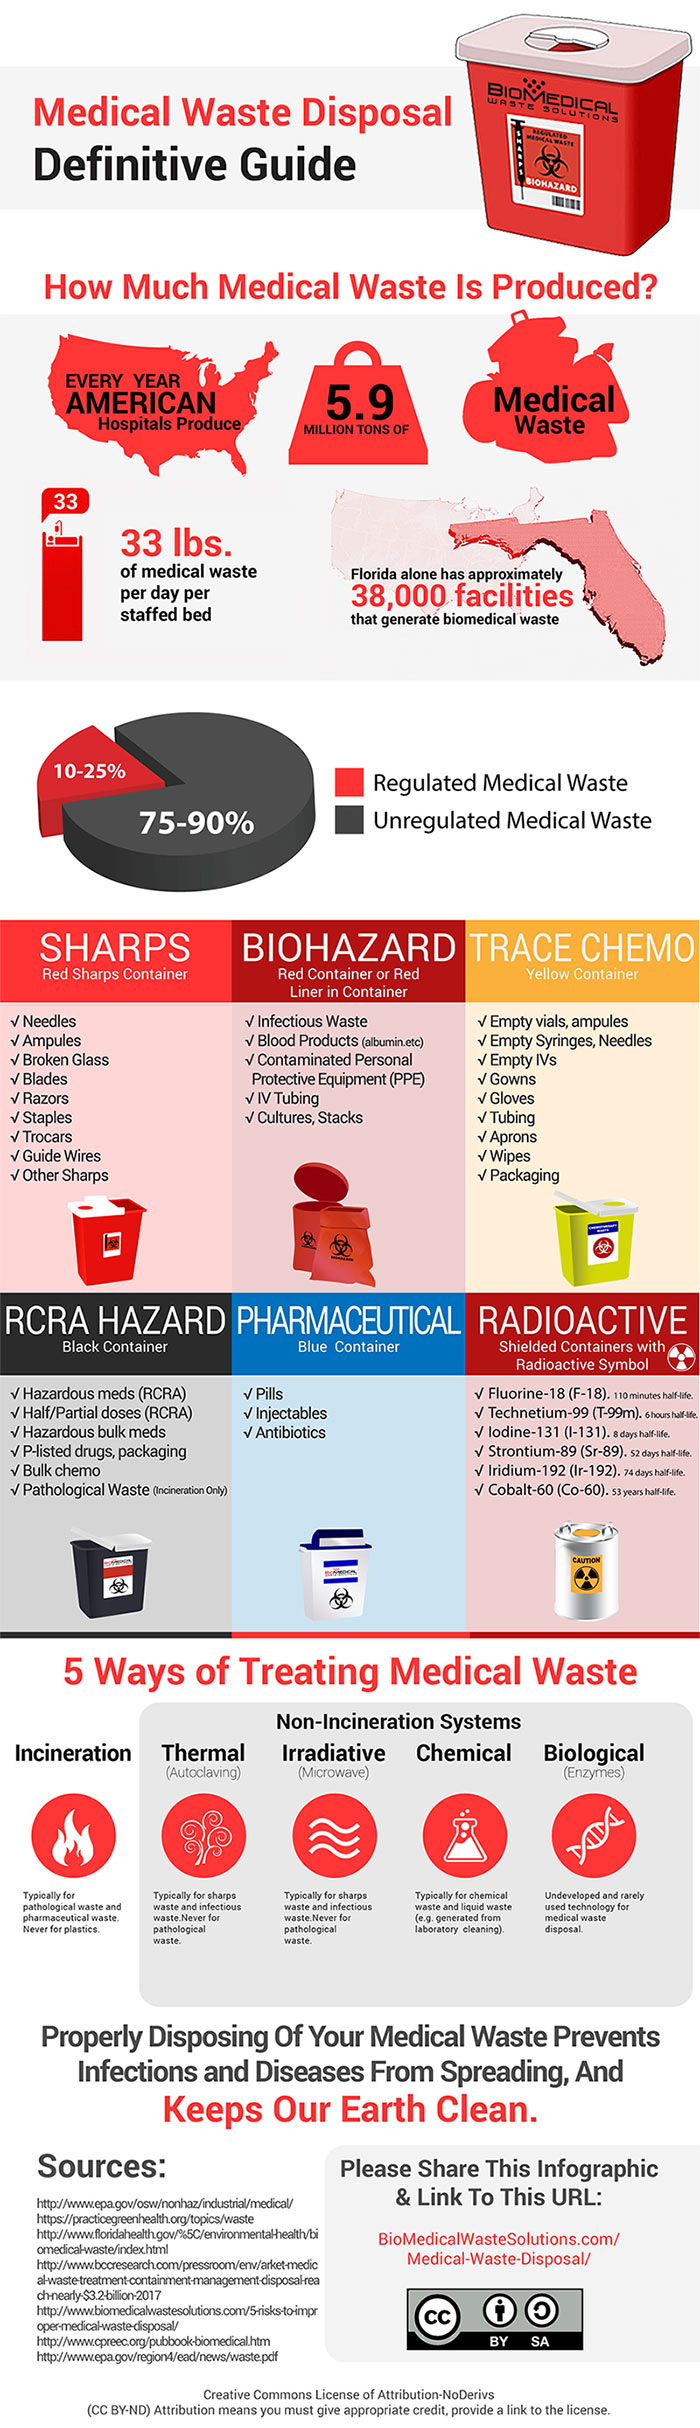 Medical-Waste-Disposal-Definitive-Guide-Infographic